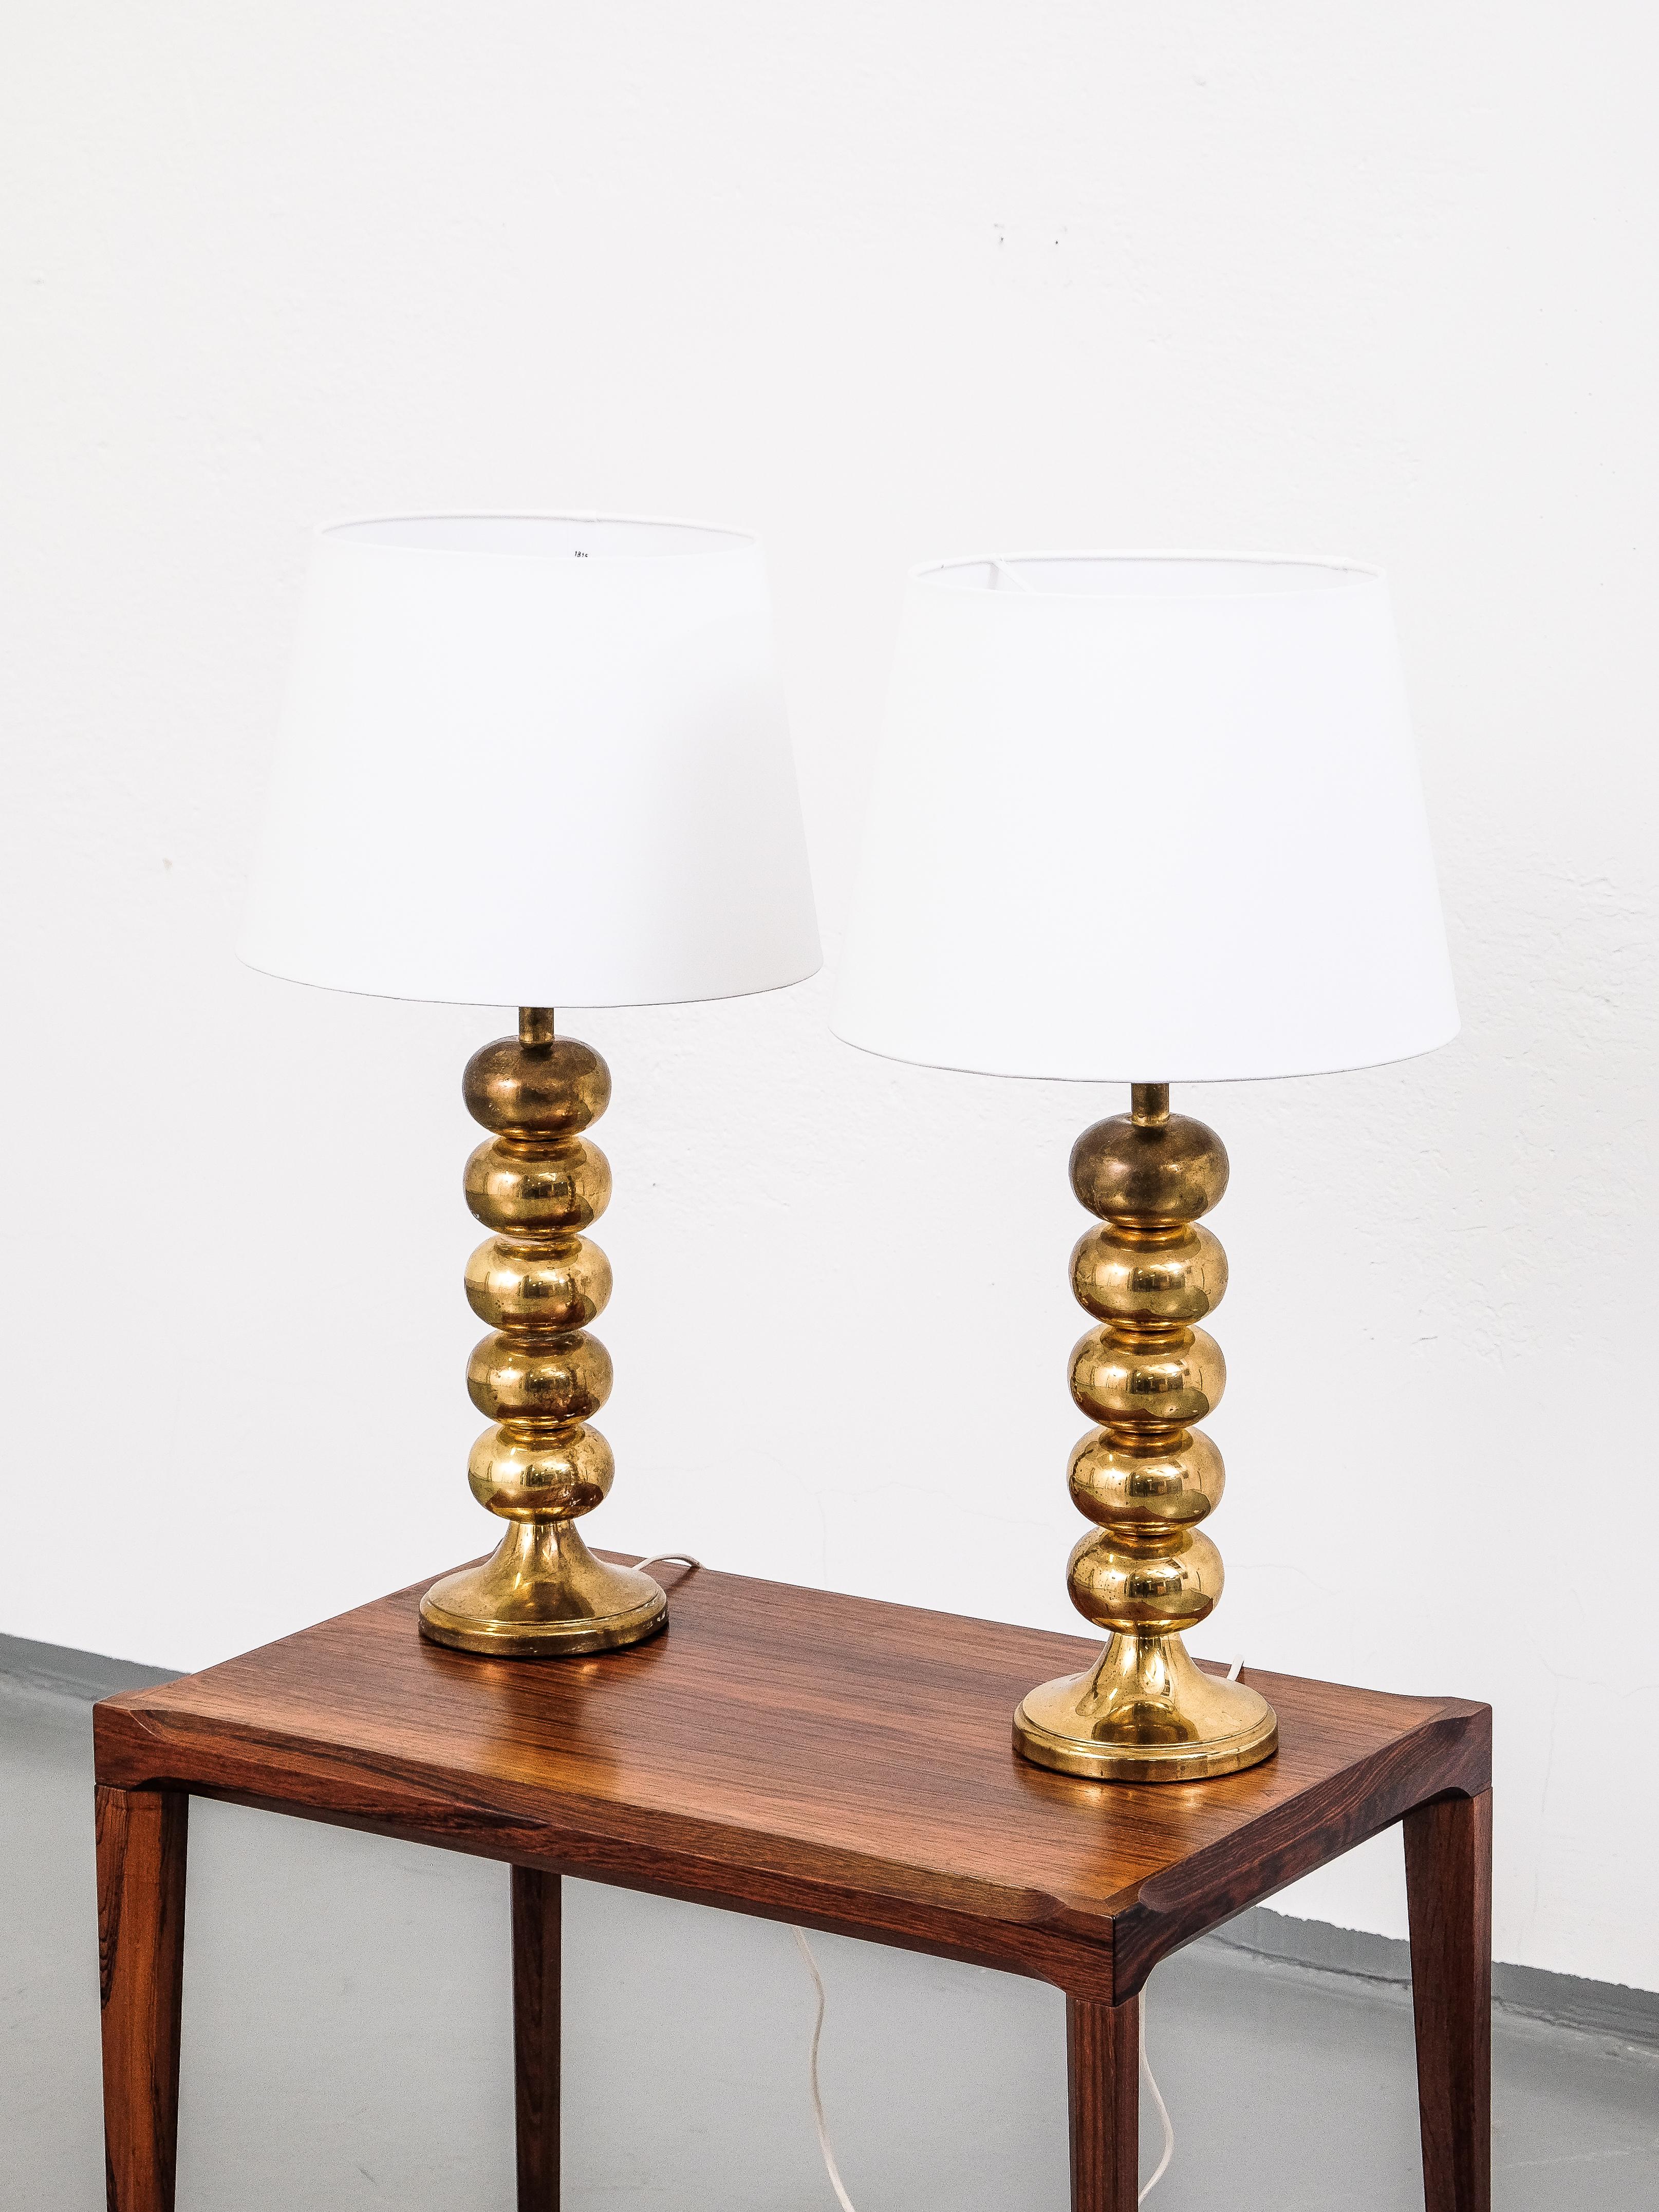 Scandinavian Modern Pair of Brass Table Lamps by Uno Dahlén for Aneta, Sweden, 1960s